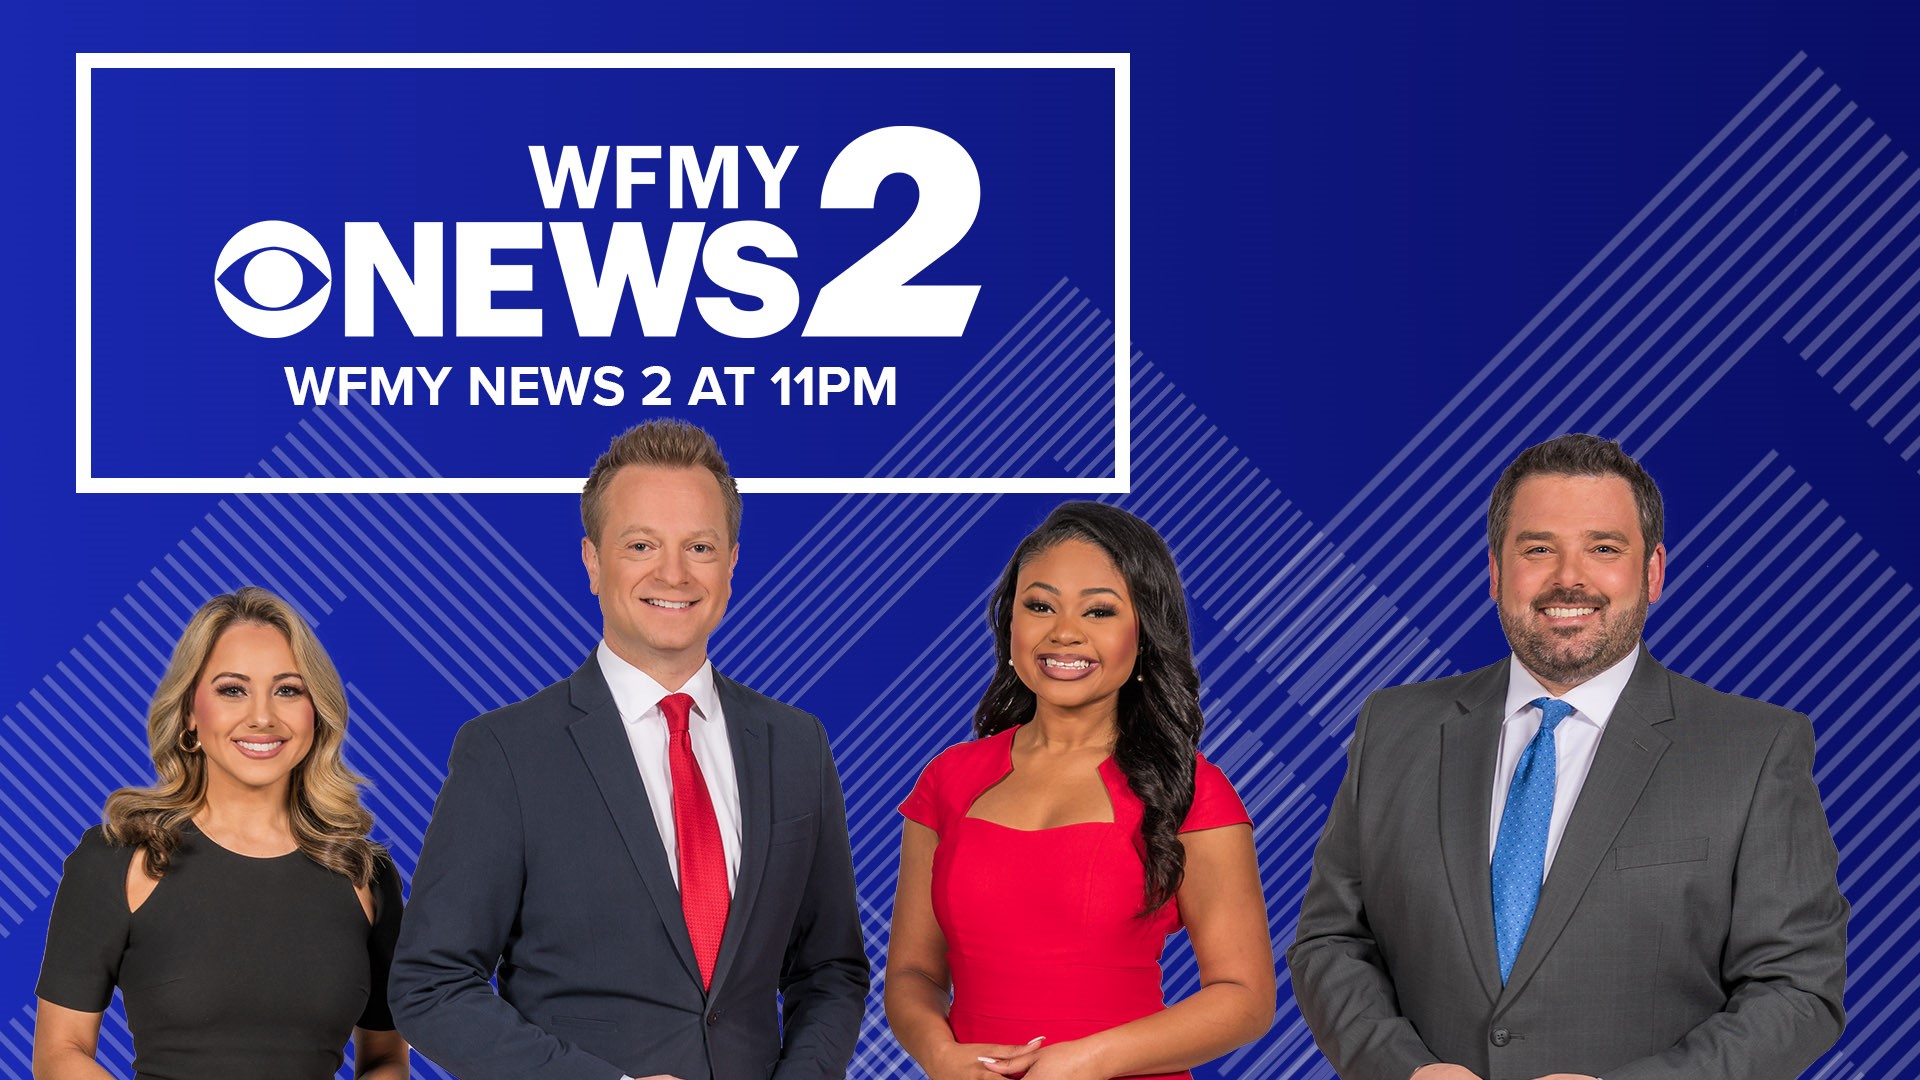 Your #1 source for the most accurate weather, latest local and breaking news and videos from WFMY News 2.